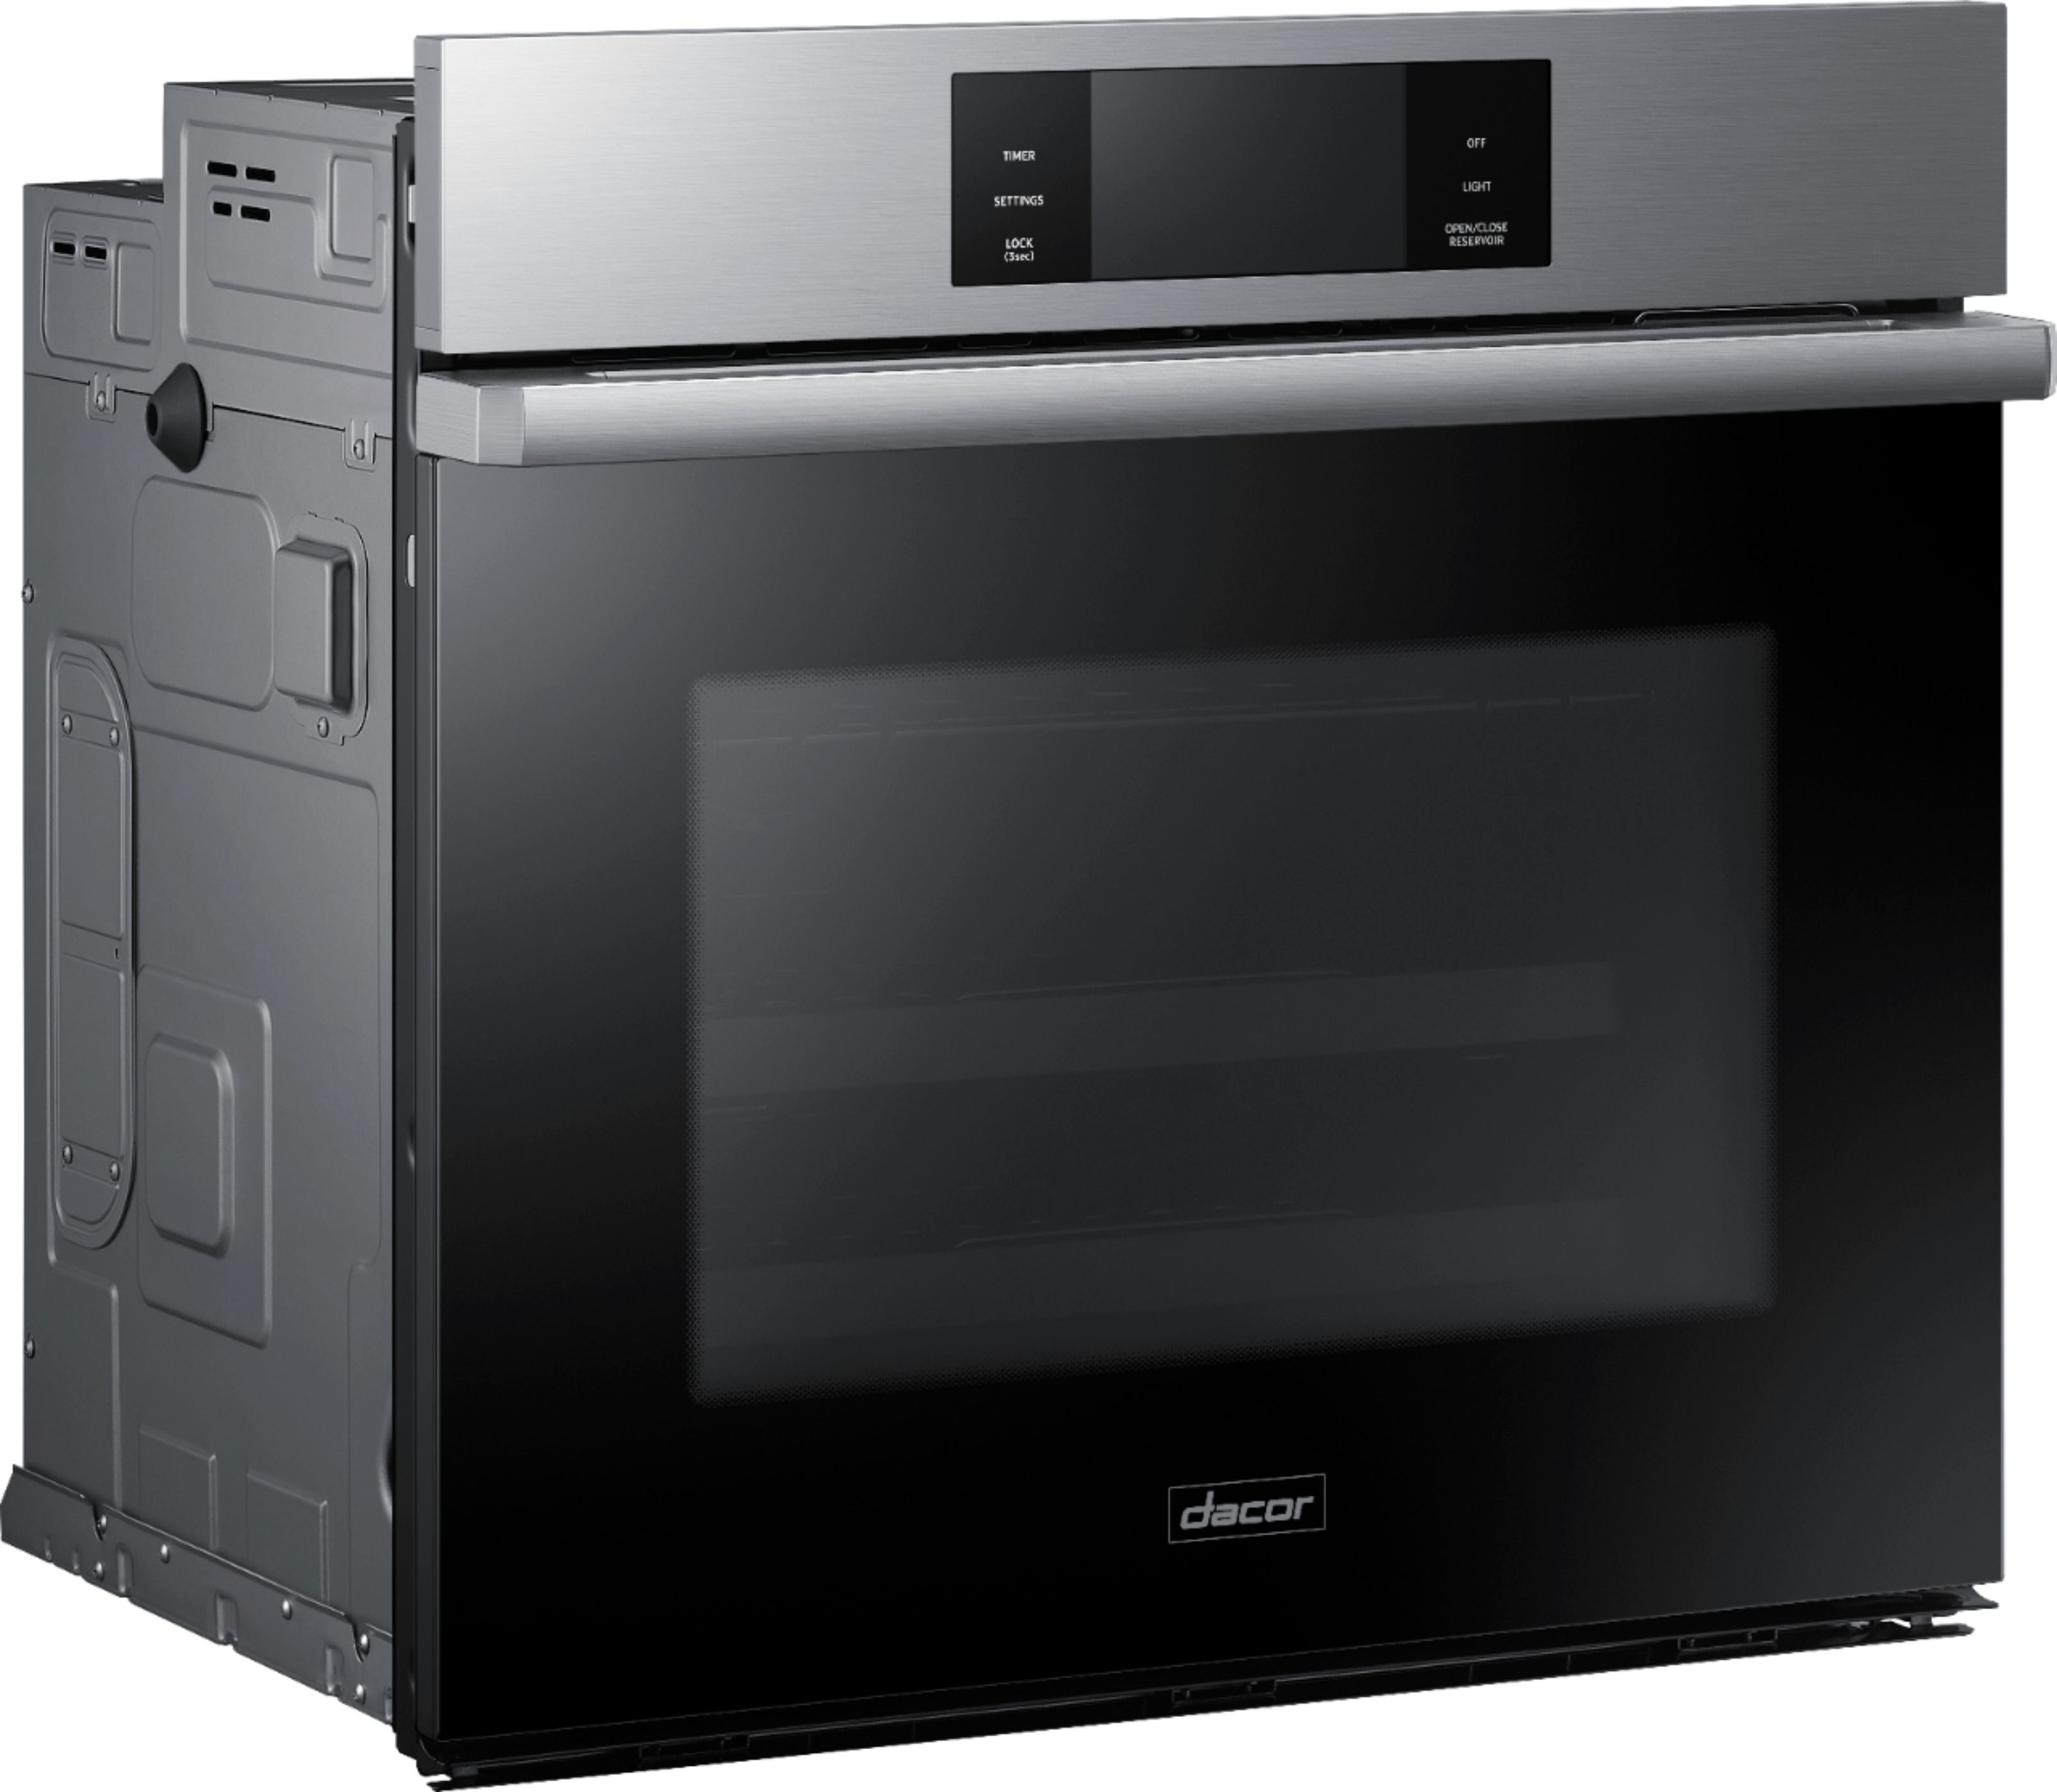 Left View: Bertazzoni - Master Series 29.8" Built-In Single Electric Convection Wall Oven - Stainless steel